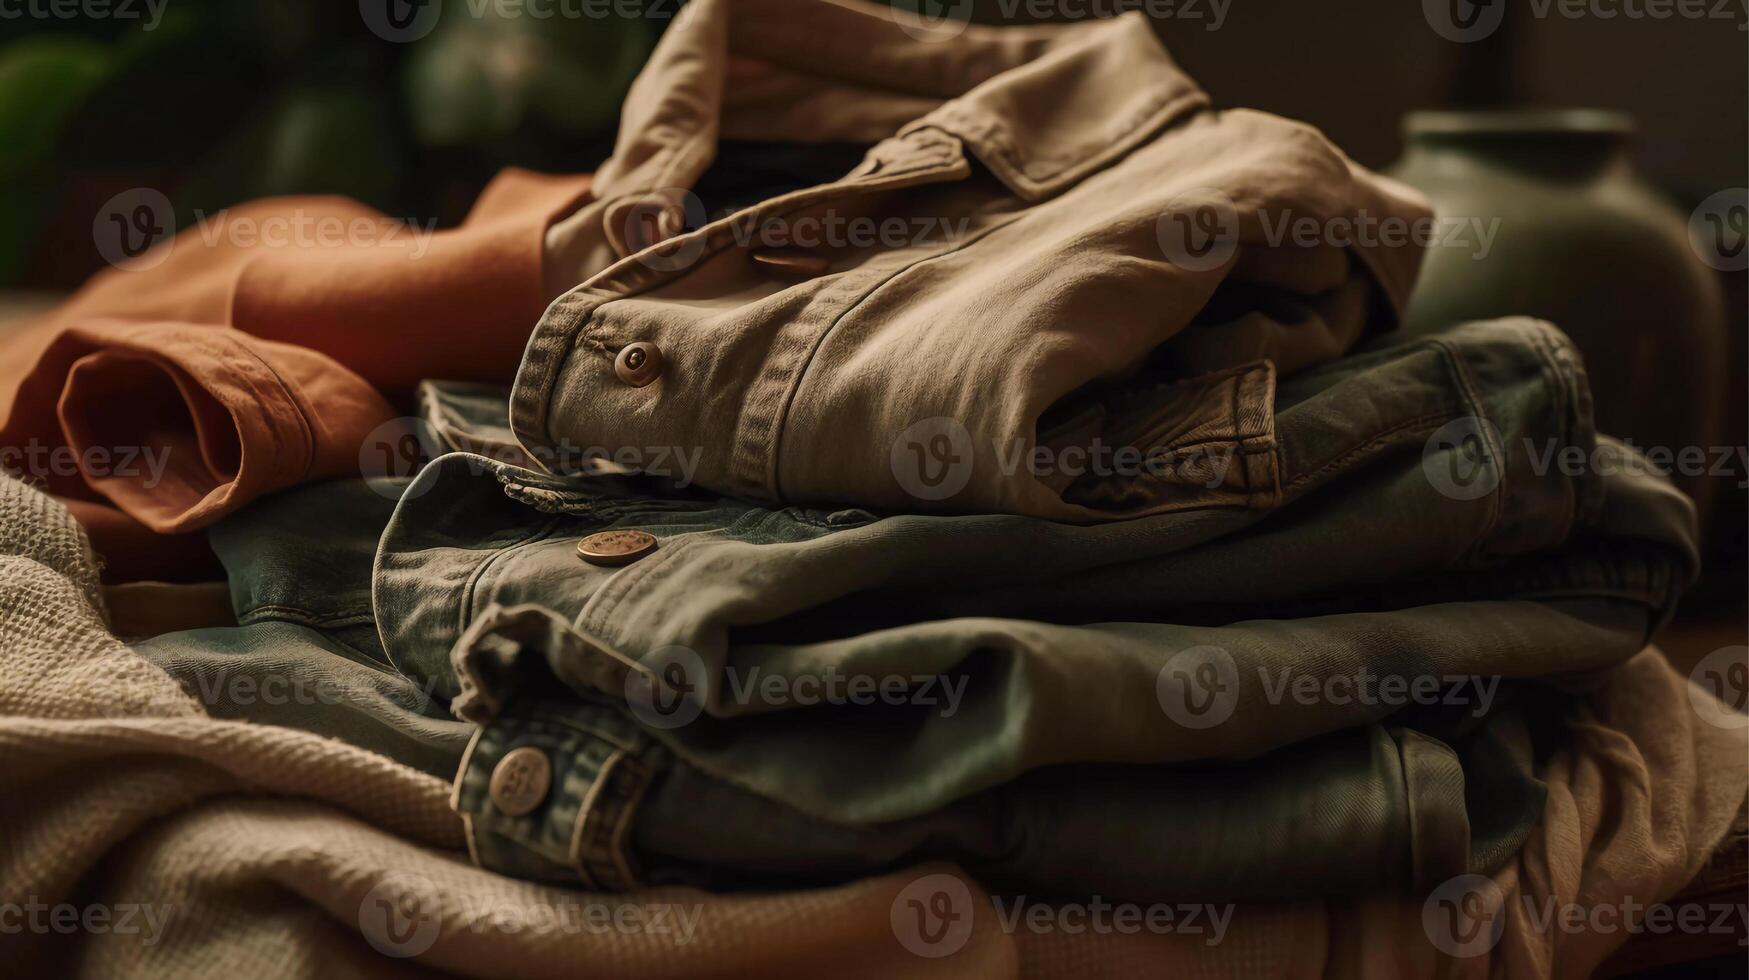 sustainable clothing items, including eco-friendly jeans and tops photo